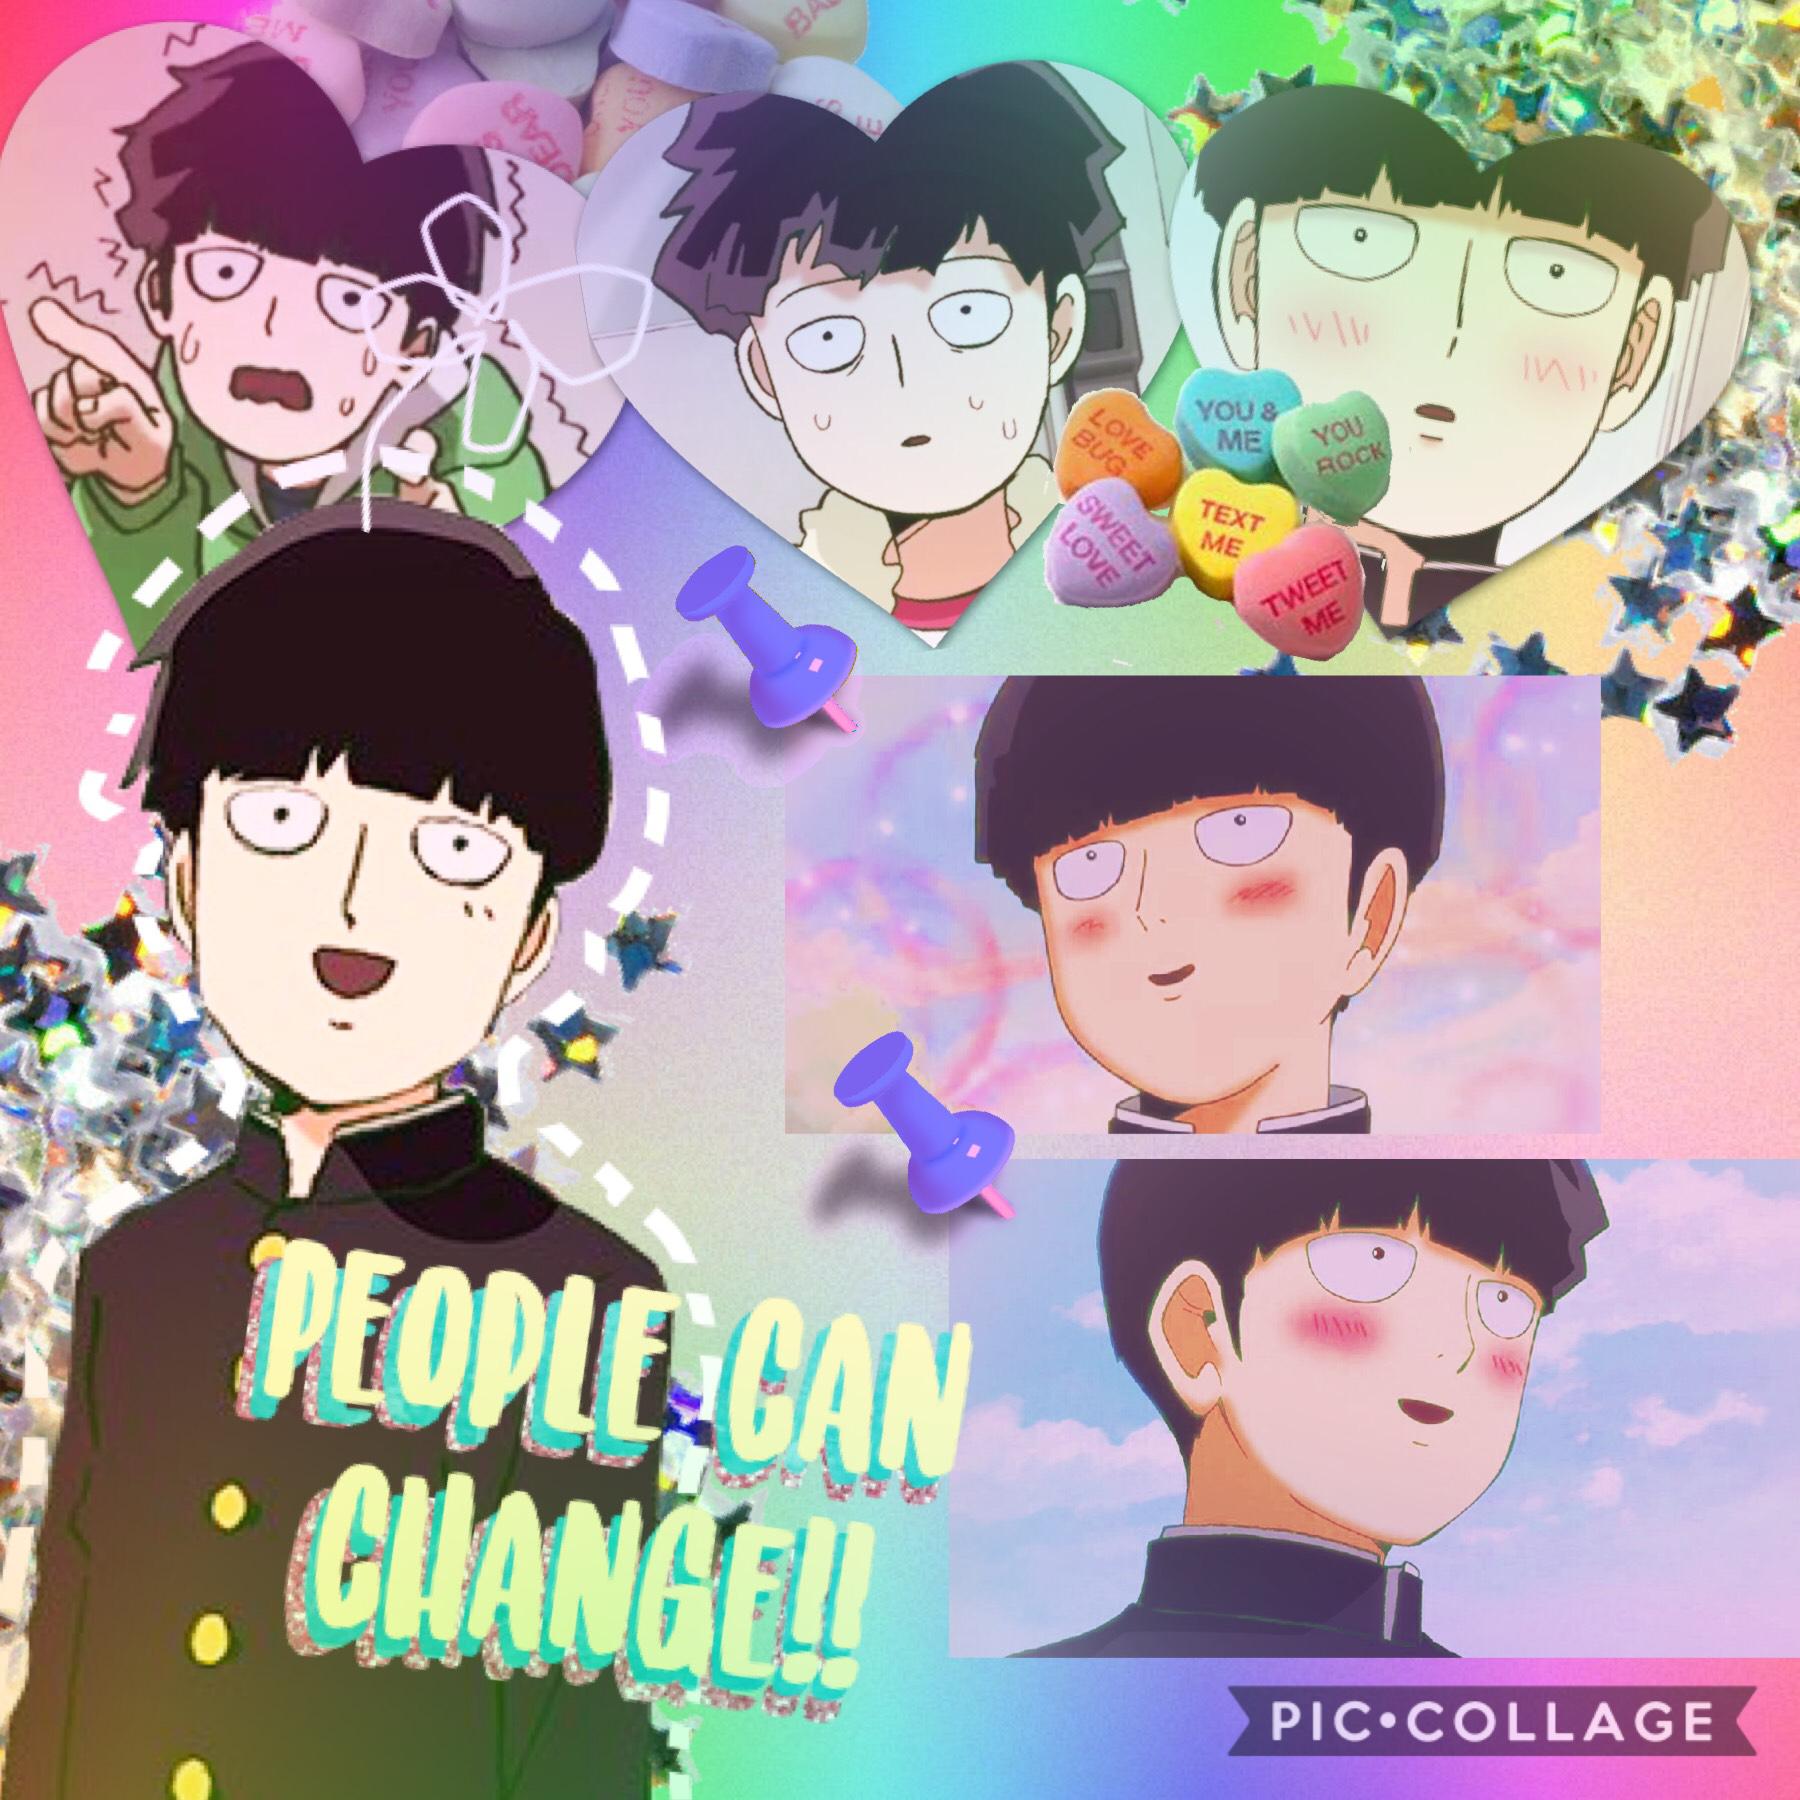 MOB👻🐮🌸✨🌈//List of favorite characters in no particular order 2/10